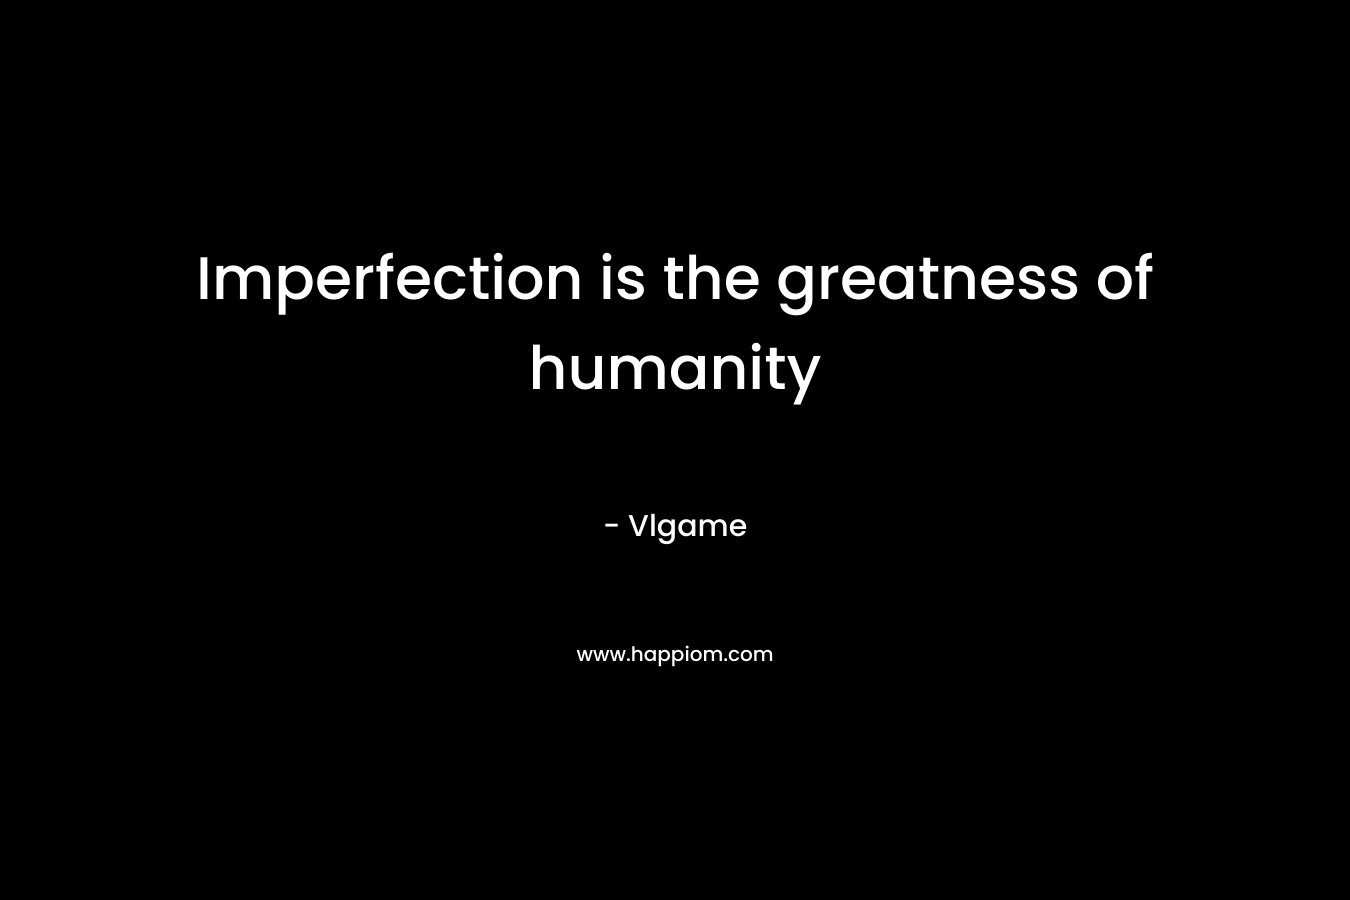 Imperfection is the greatness of humanity